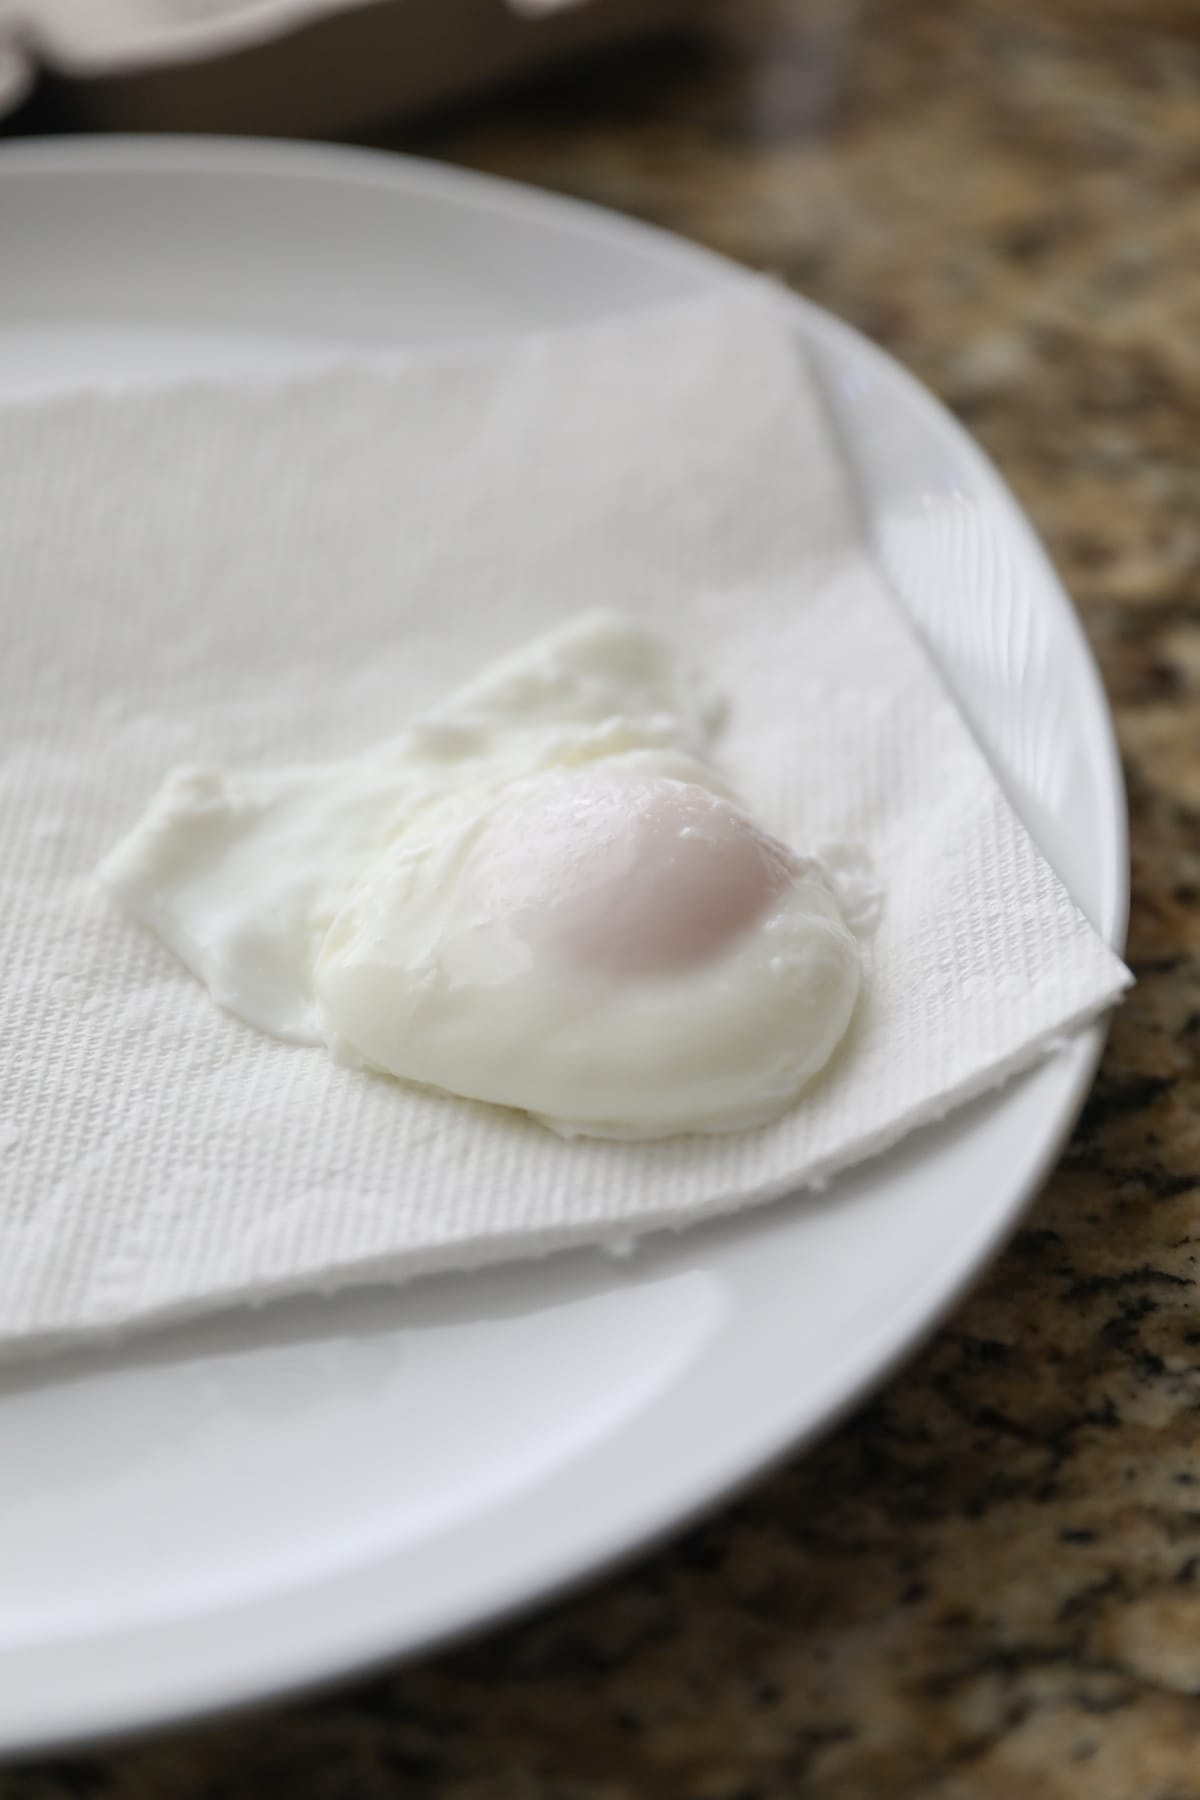 poached egg on paper towels